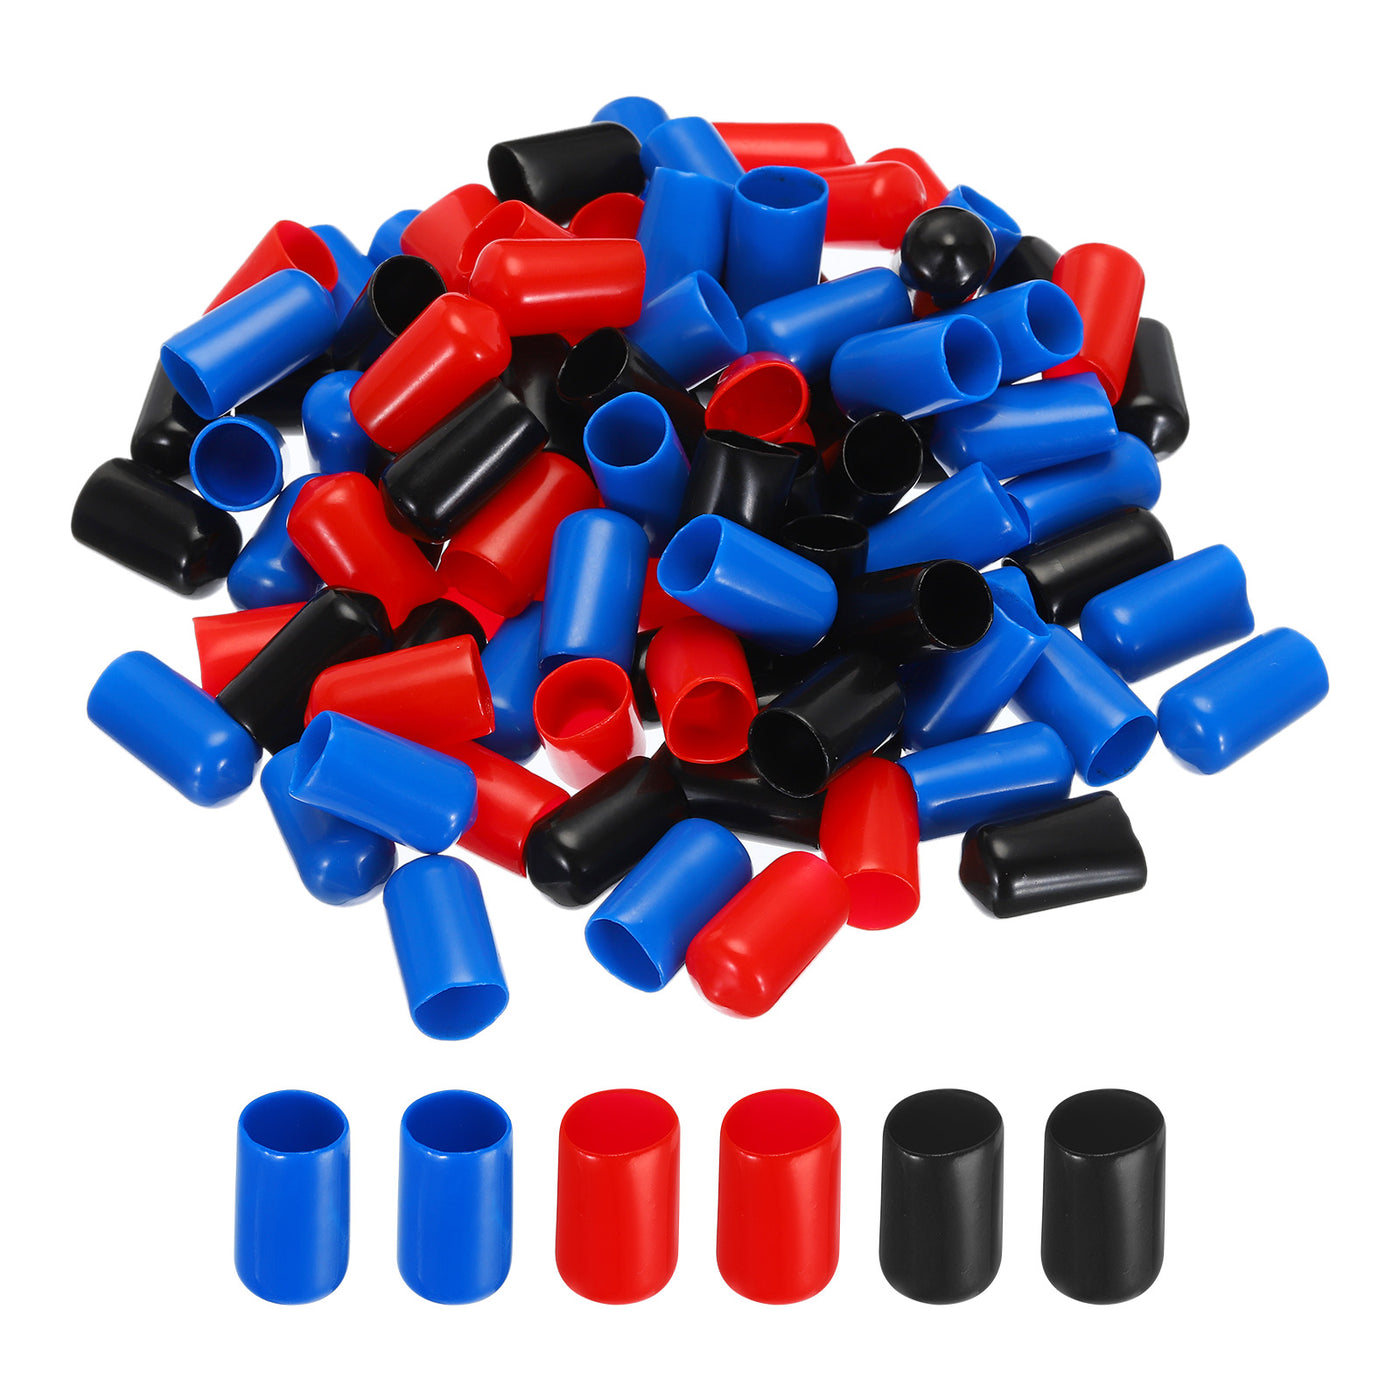 uxcell Uxcell 180pcs Rubber End Caps 11mm ID Vinyl PVC Round Tube Bolt Cap Cover Screw Thread Protectors, Black Red Blue